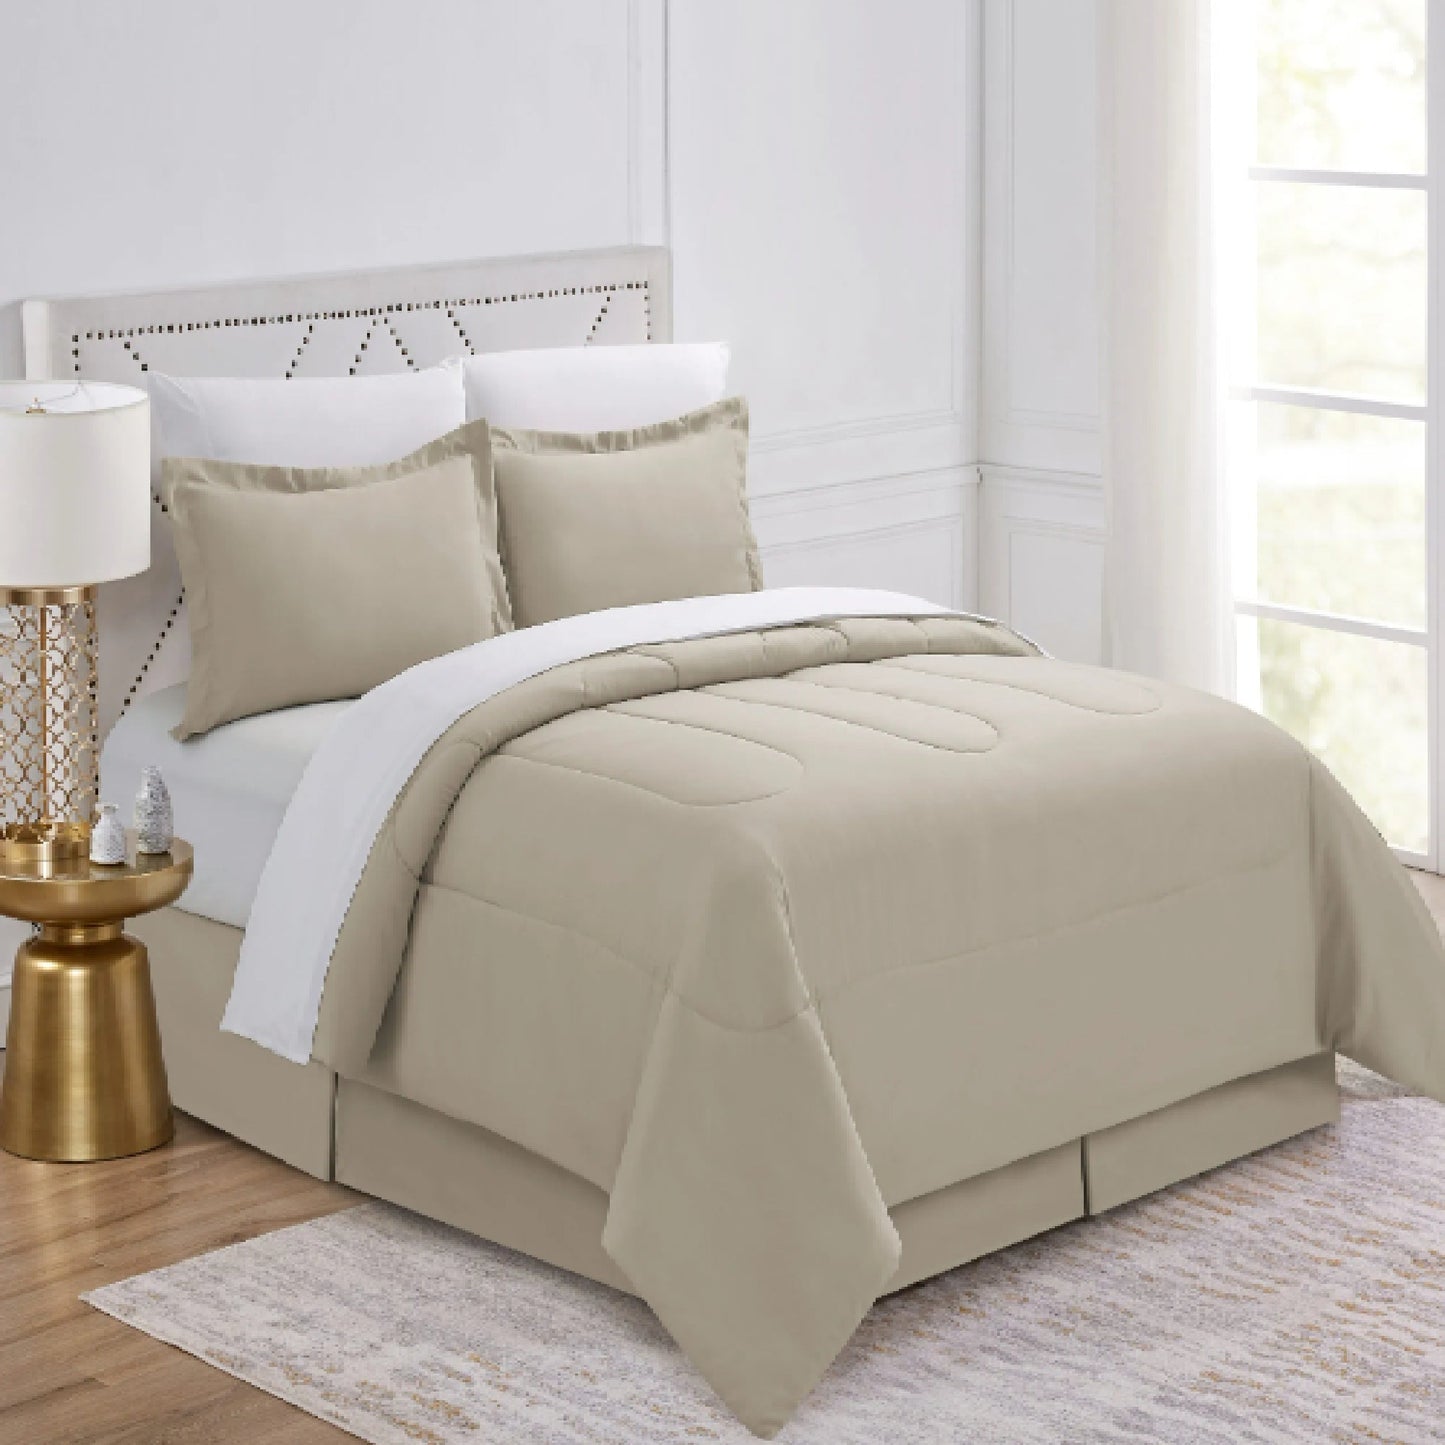 Sumptuously Soft and Breathable Cotton Bedding Ensemble - Beige